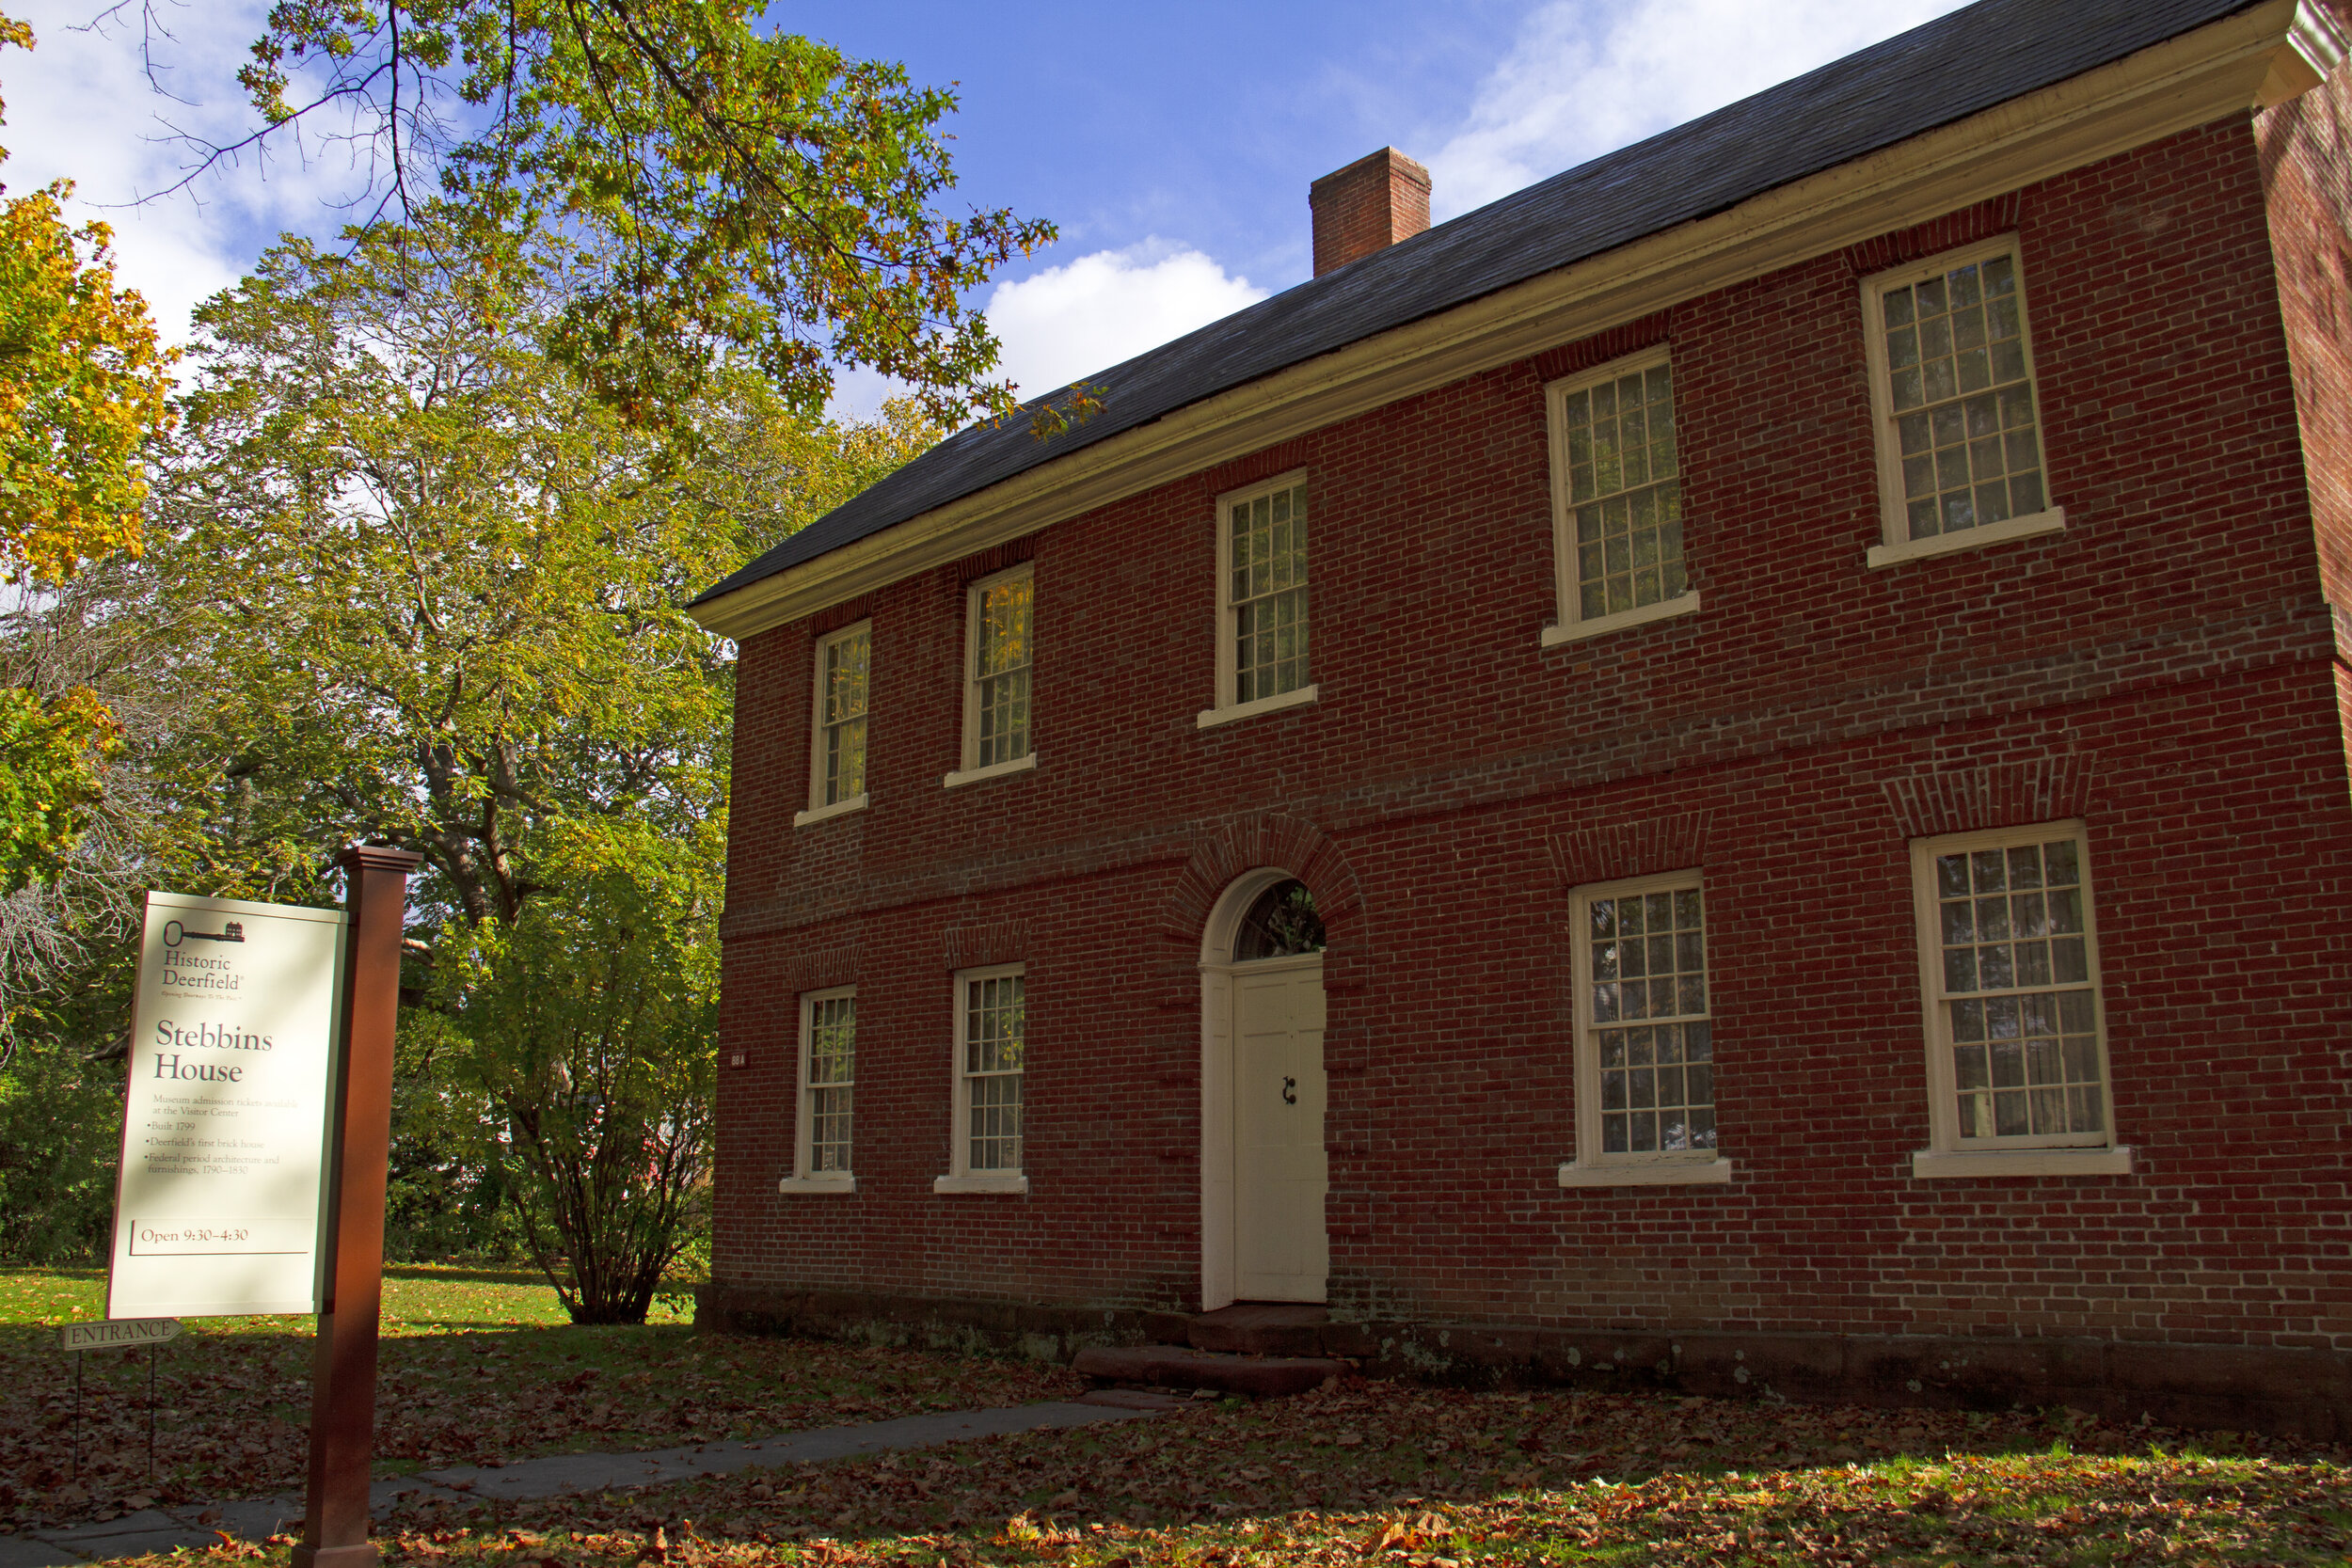 The Stebbins House, built in 1799